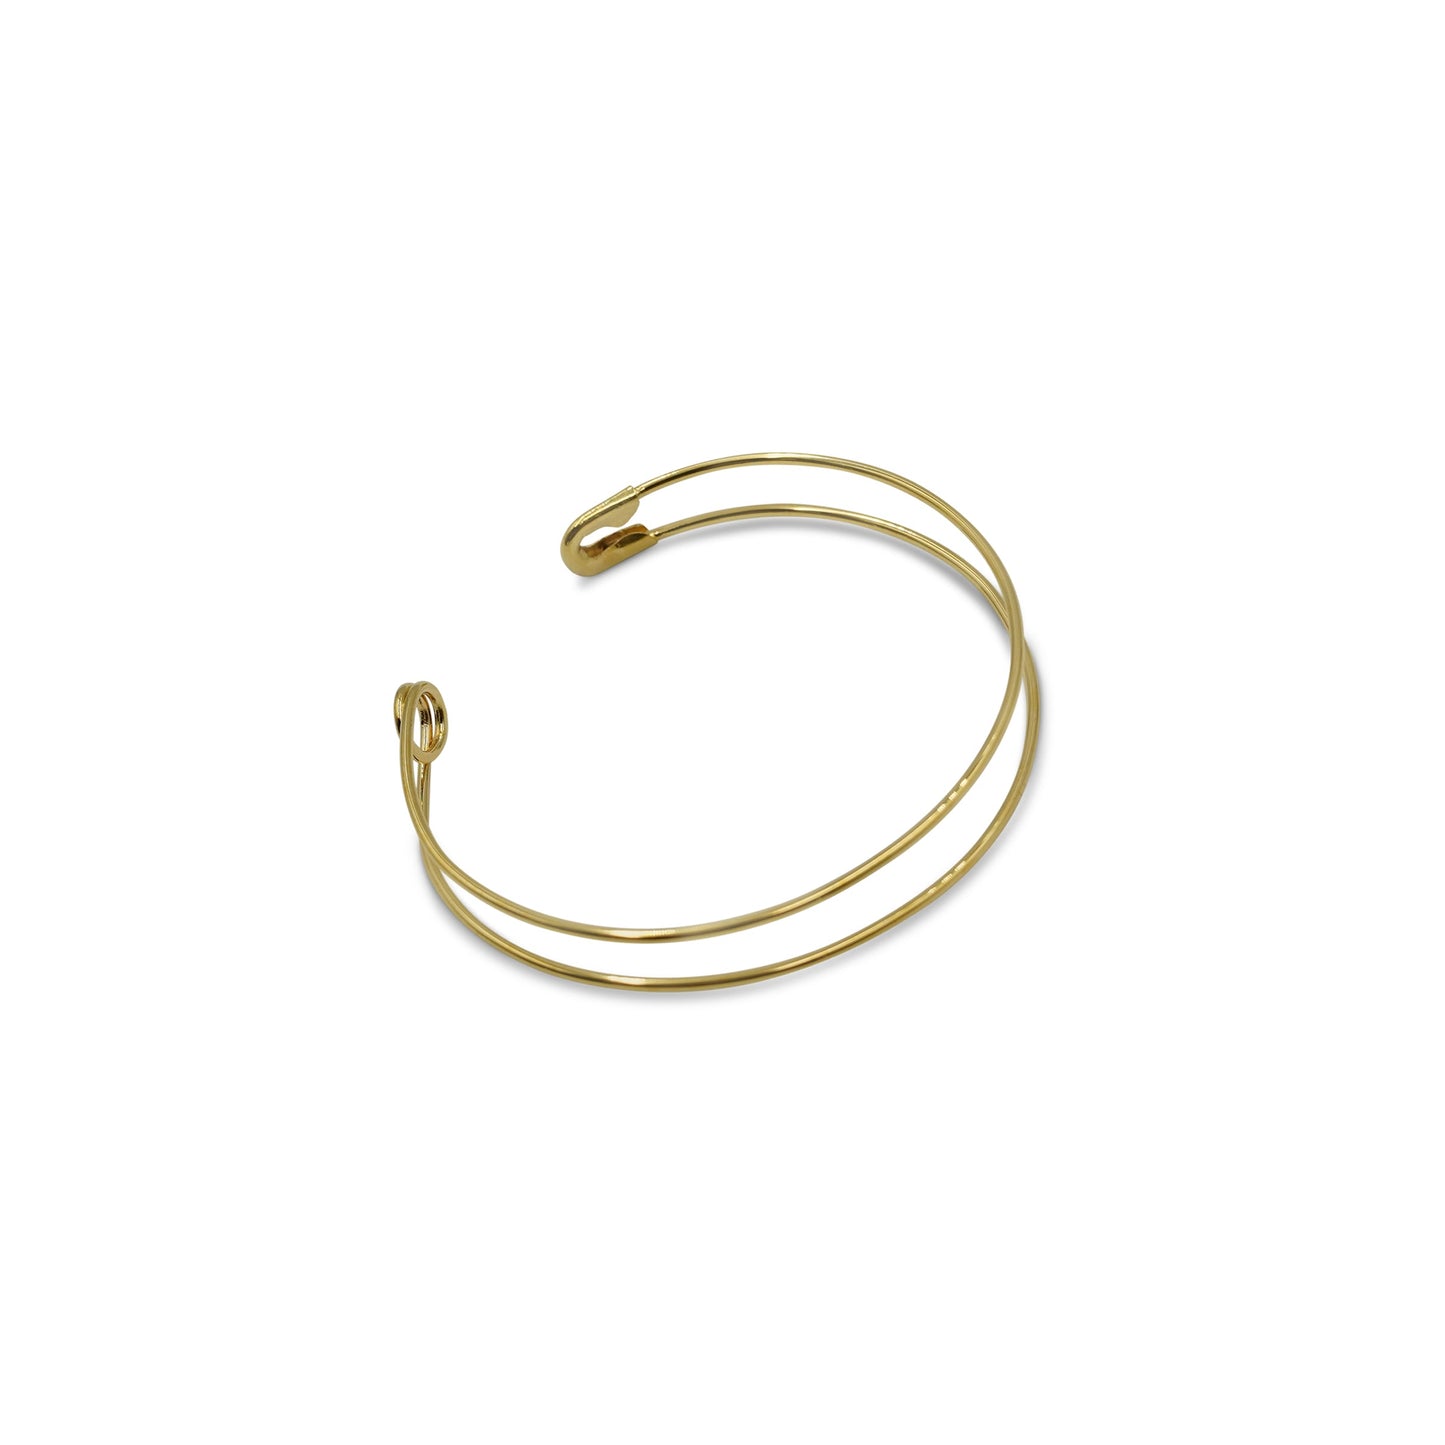 Safety Pin Bangle in Gold